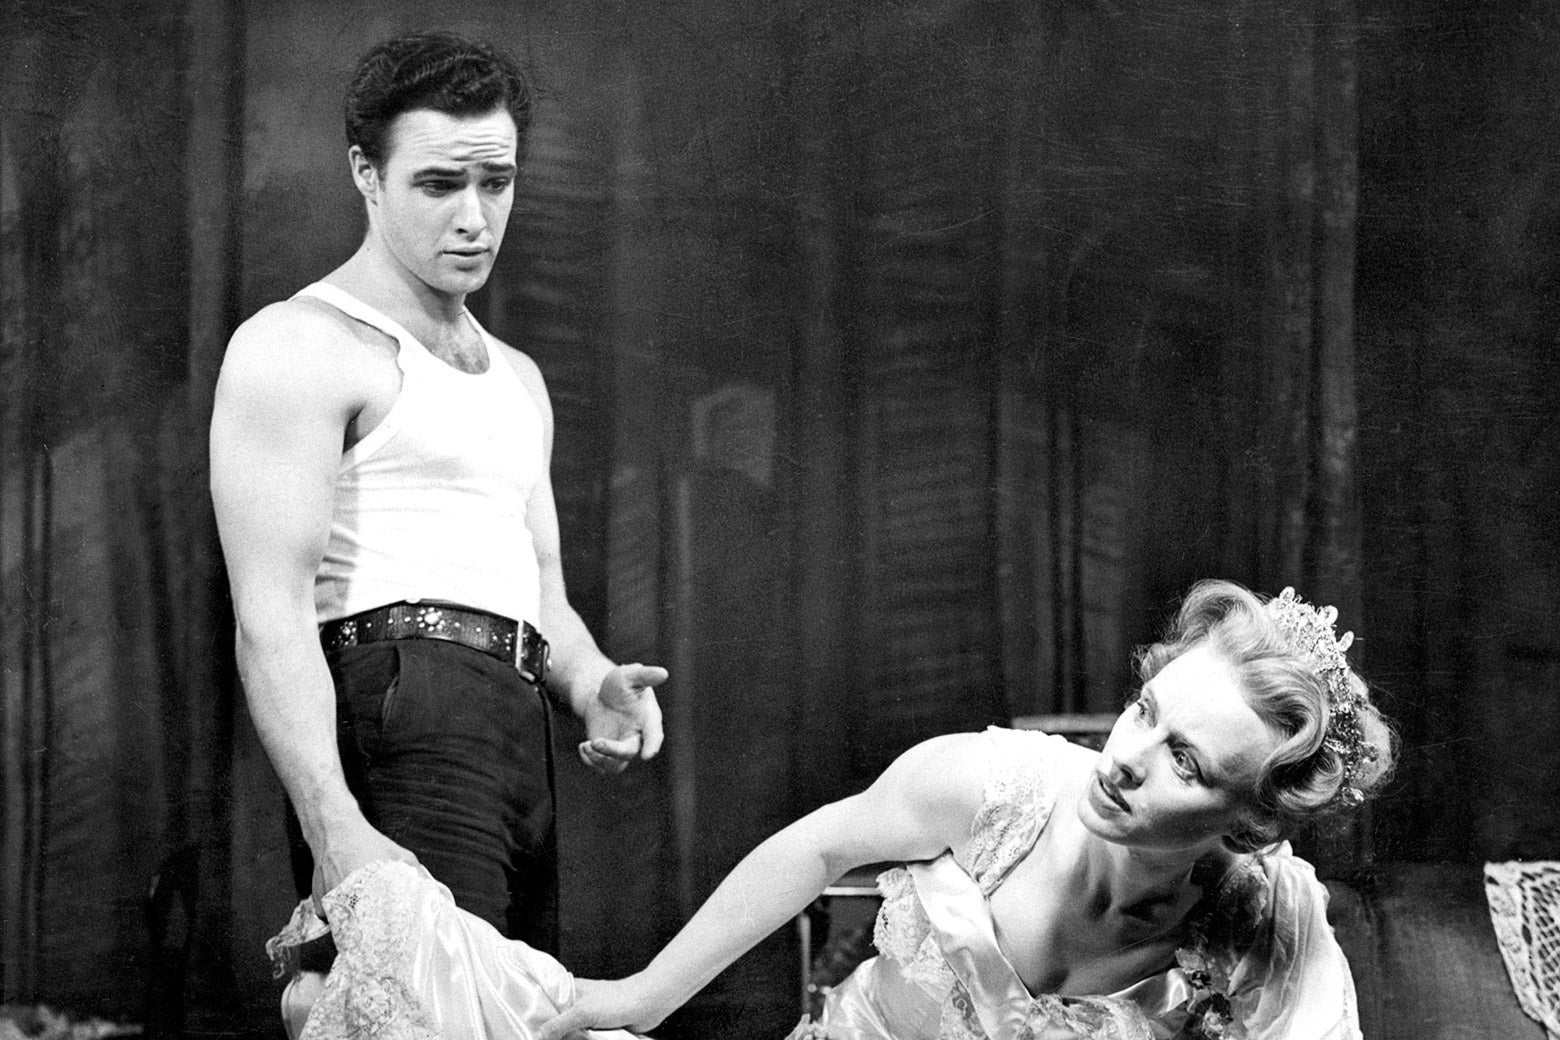 Brando as Stanley Kowalski in a white tank top and jeans stands near Tandy as Blanche DuBois in a tiara and a lacy dress sitting in a chair and leaning over to look to the side